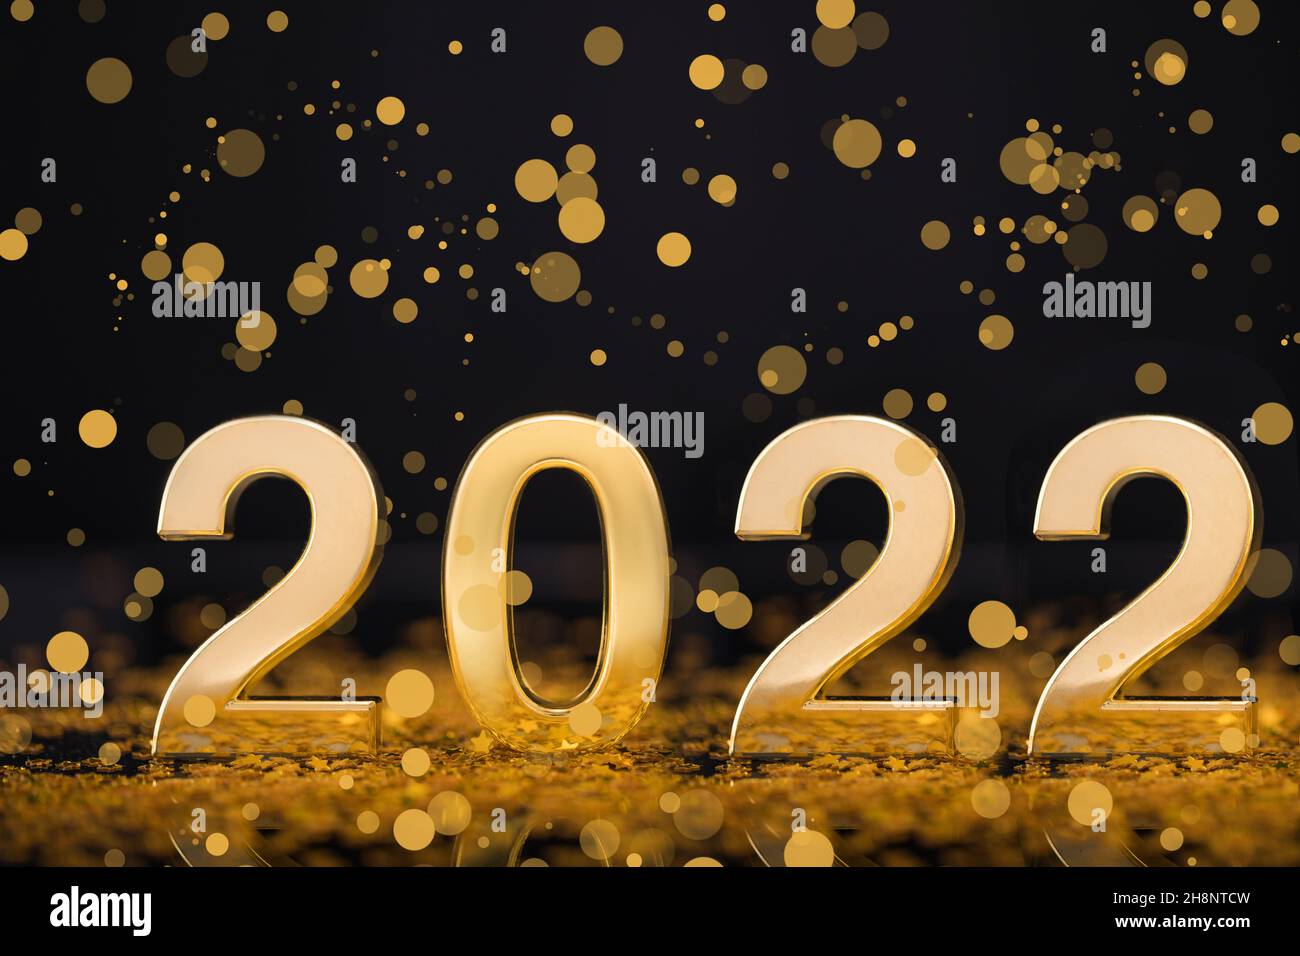 Happy New Year 2022 background with gold light background Stock Photo